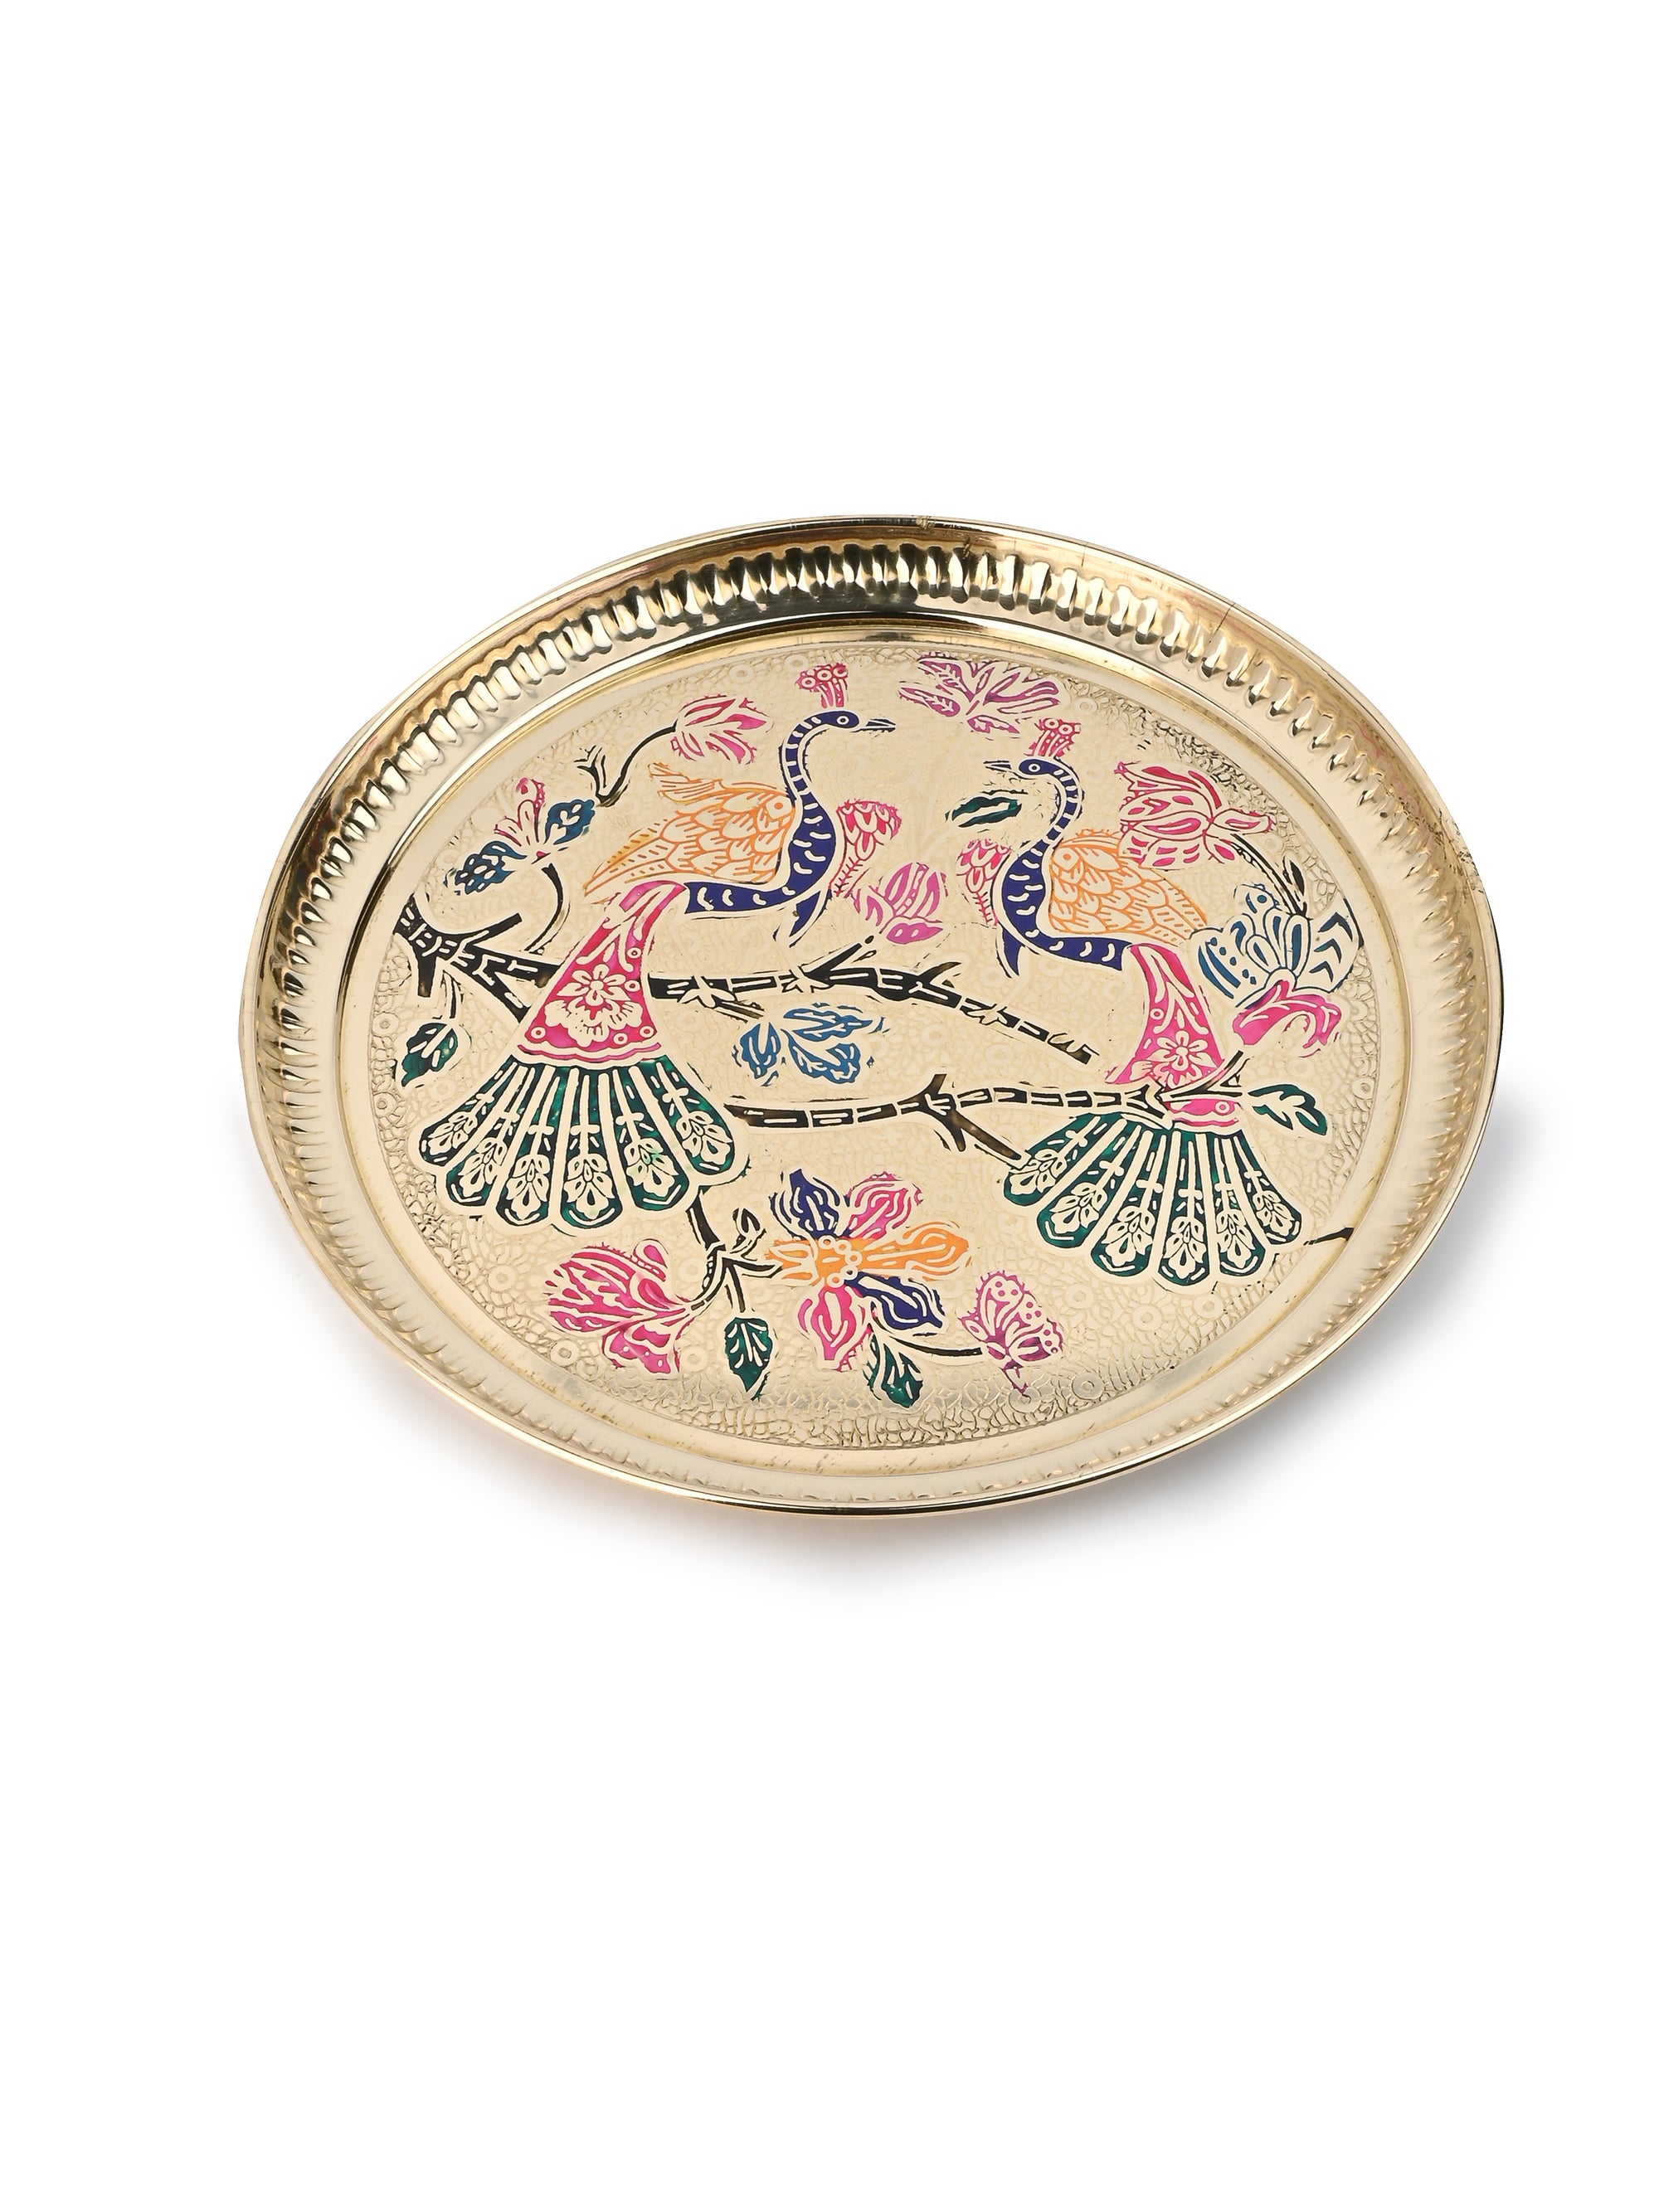 Handcrafted Brass Plate with Colorful Peacock Design - 10 inches